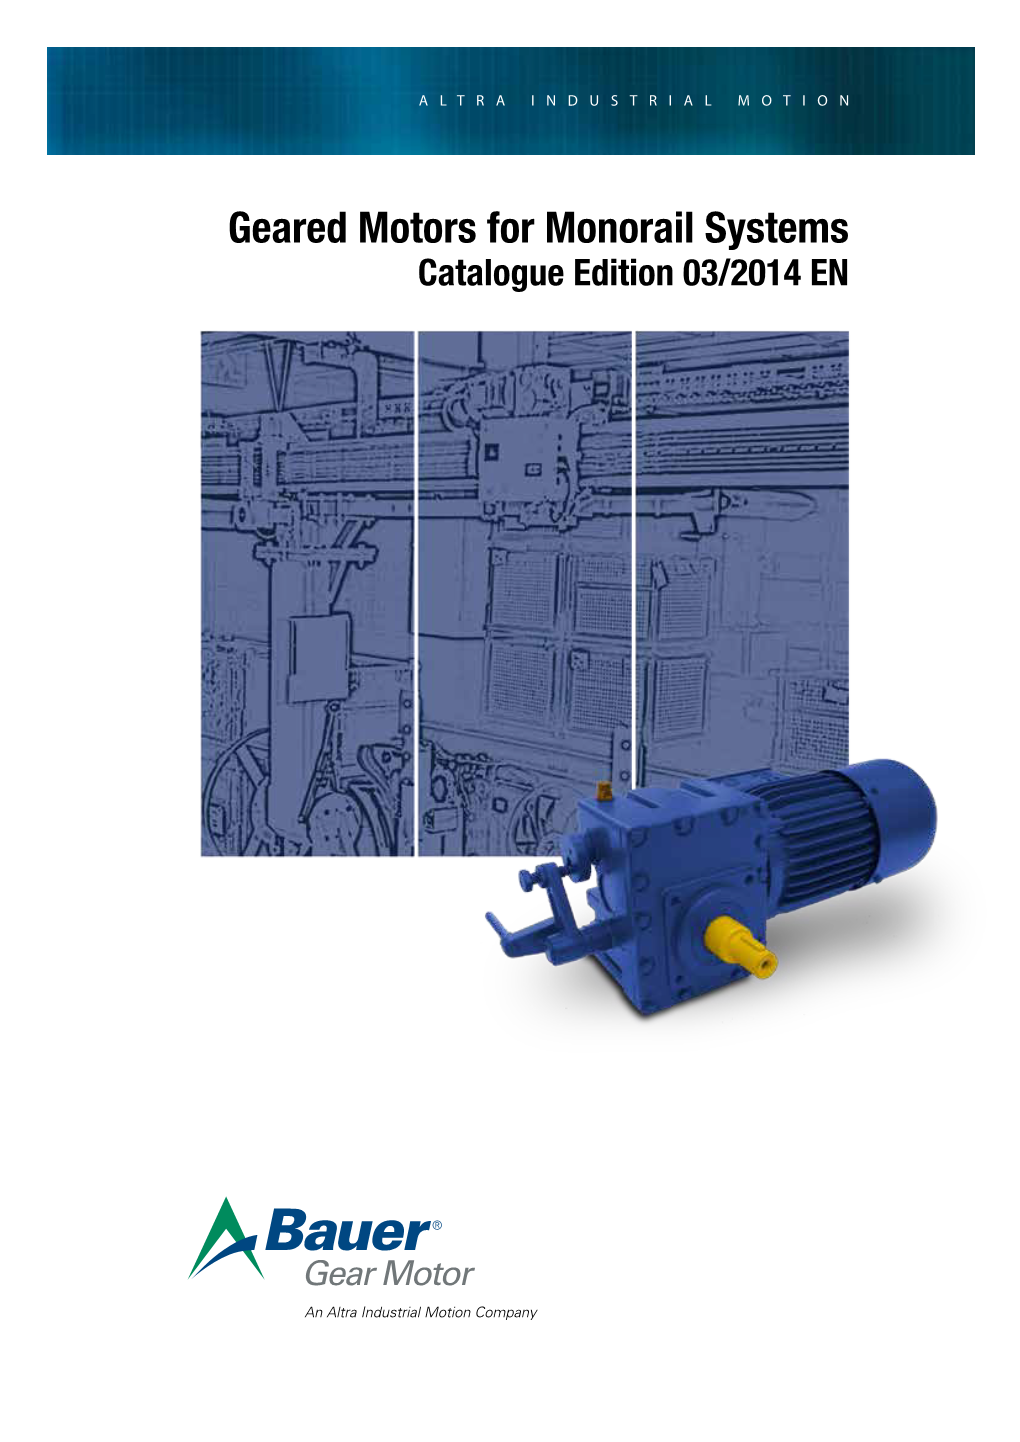 Geared Motors for Monorail Systems Geared Motors for Monorail Systems Catalogue Edition 03/2014 EN Worldwide Efficiency Regulations the Standards at a Glance